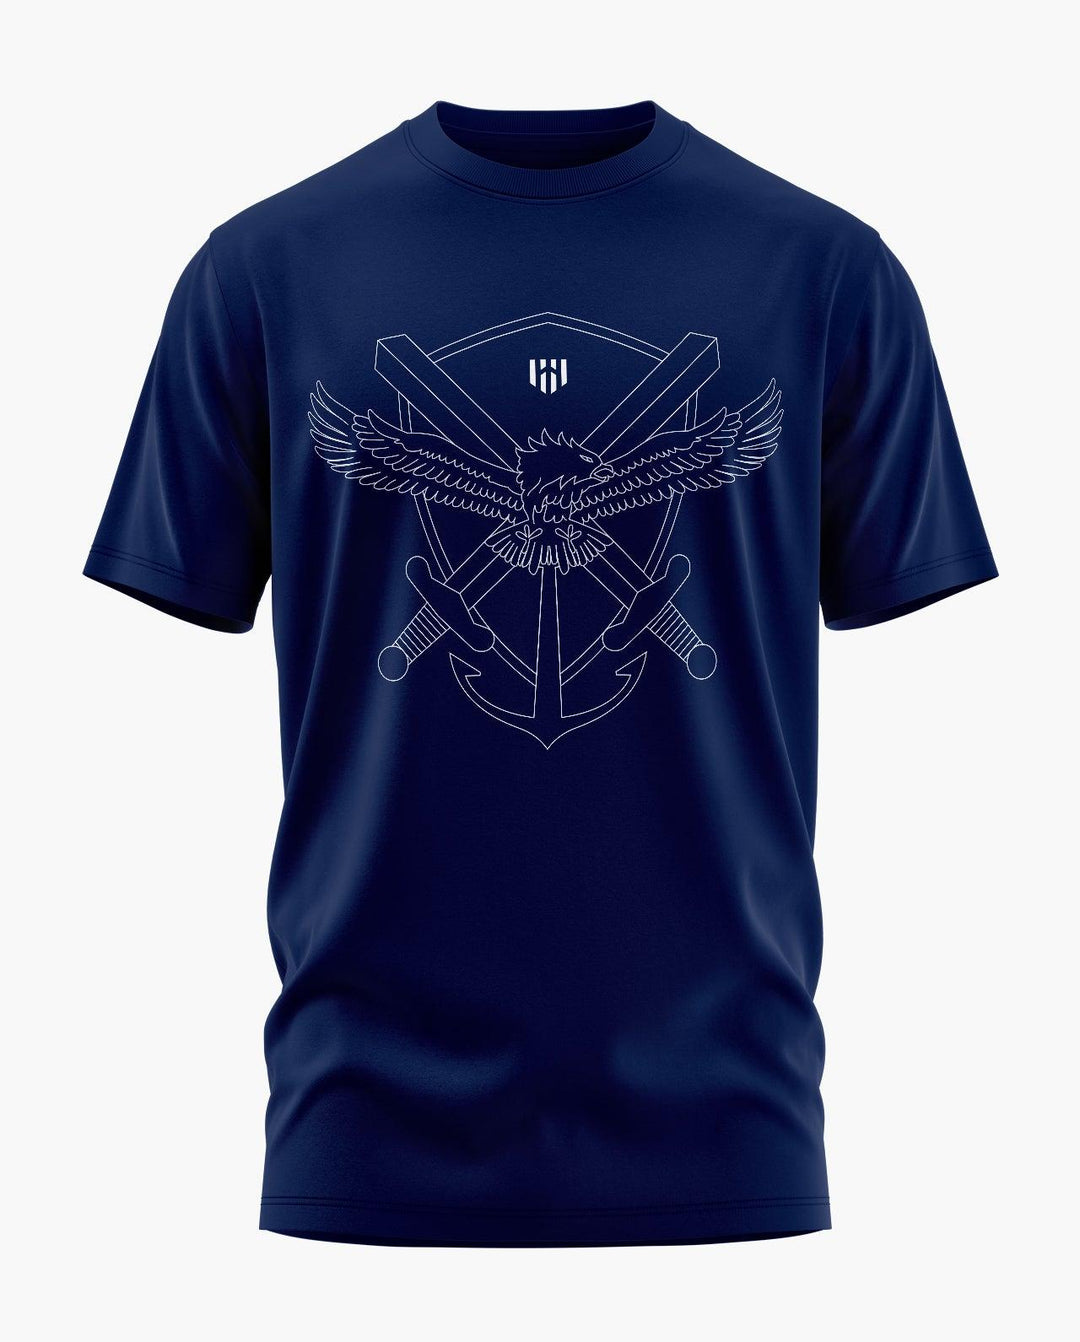 The Armed Forces T-Shirt - Aero Armour